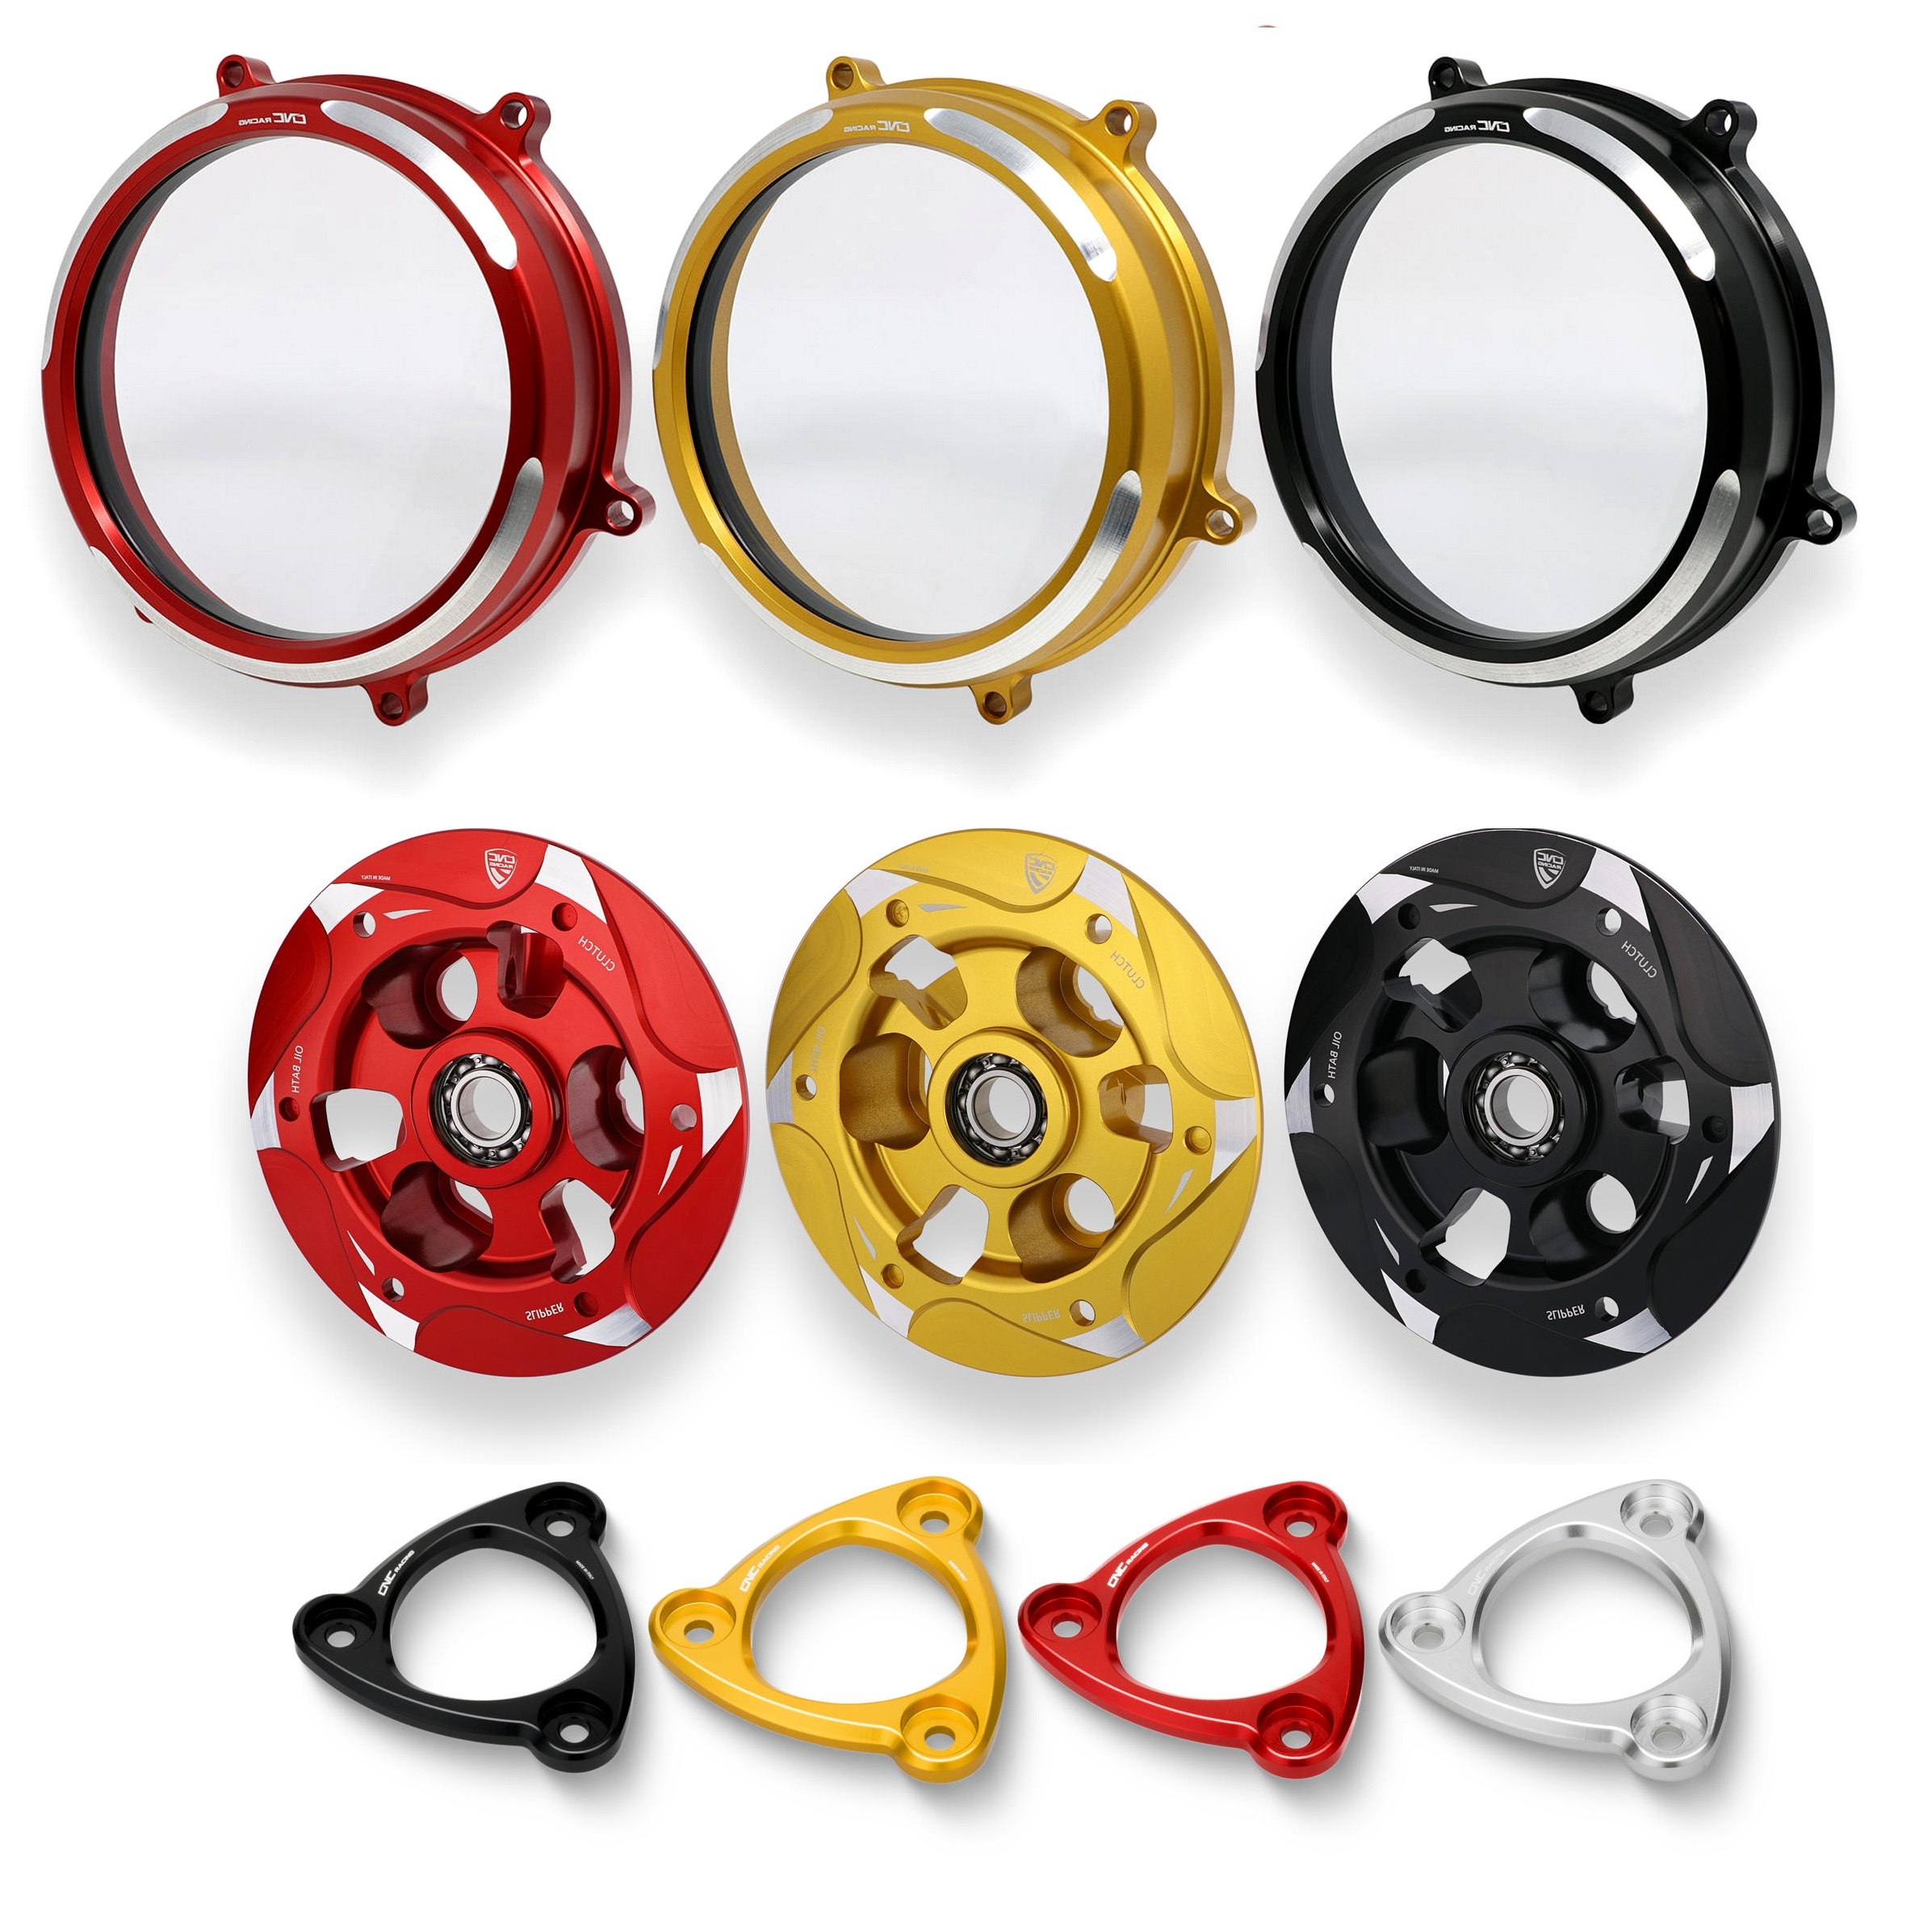 KIT PLEXIGLASS CARBON CLUTCH CLEAR COVER CNC RACING FOR DUCATI PANIGALE 1199 - 1299 - 959 - CA200S+SP200S+SF200